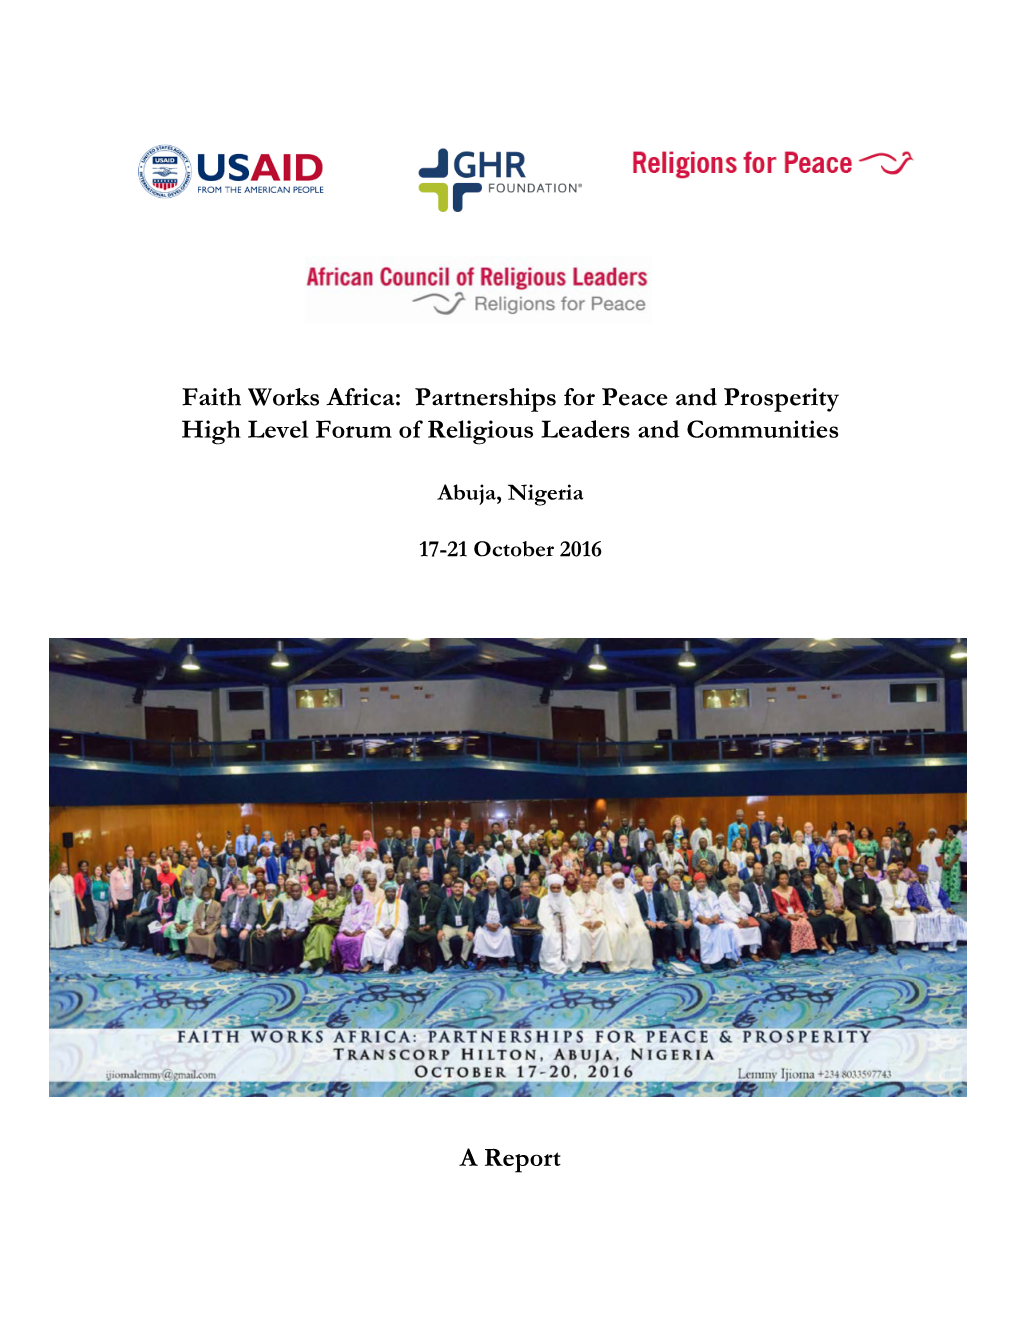 Faith Works Africa: Partnerships for Peace and Prosperity High Level Forum of Religious Leaders and Communities